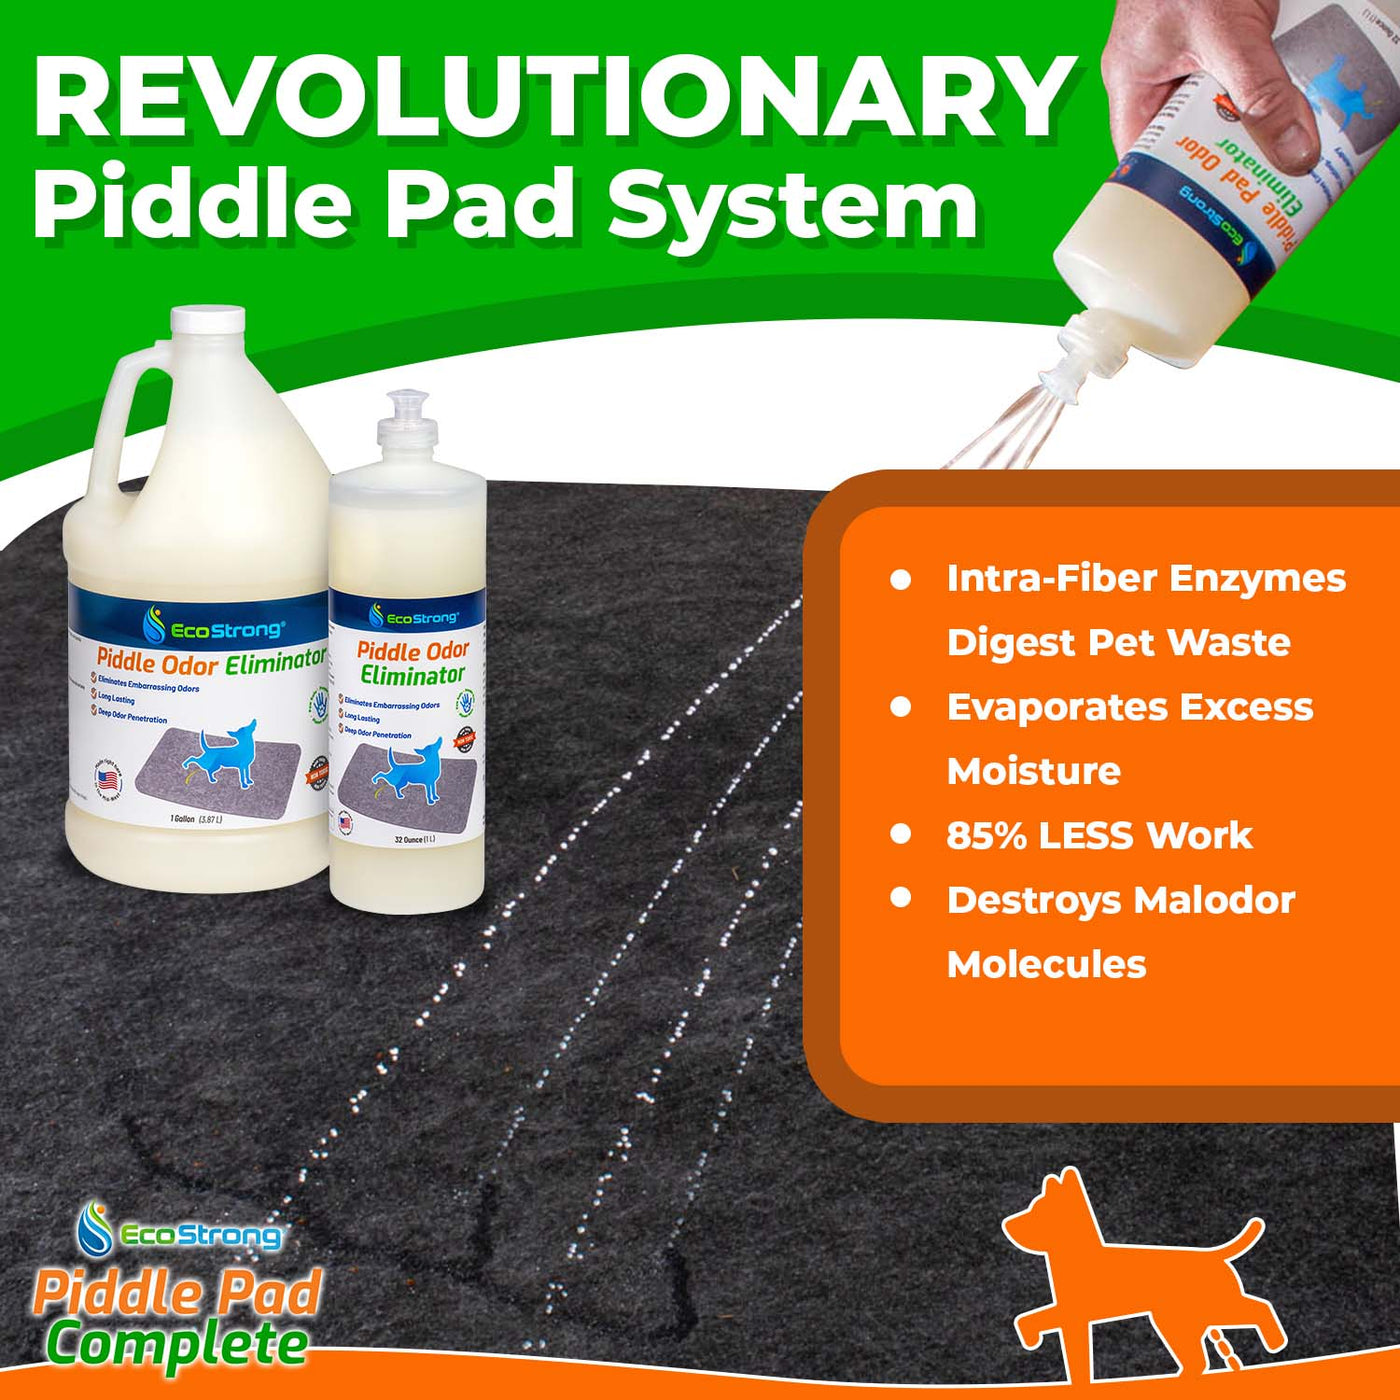 EcoStrong Piddle Pad Complete#size_two-24-x-36-inch-pads-and-32-oz-piddle-odor-eliminator